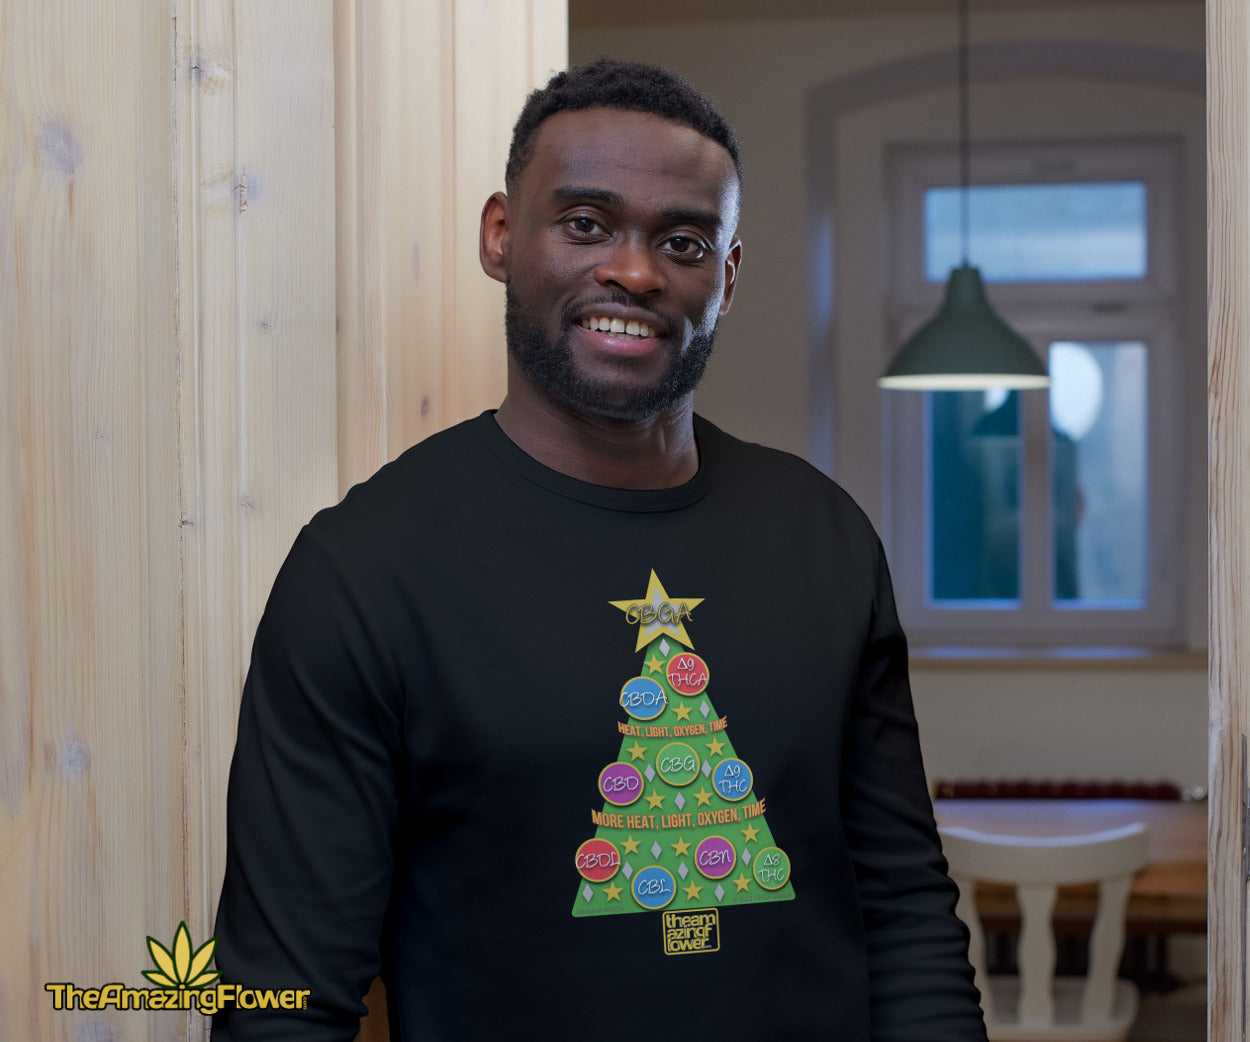 Cannabinoid Holiday Tree Long Sleeve Black T-shirt worn by a smiling man in the doorway to his kitchen